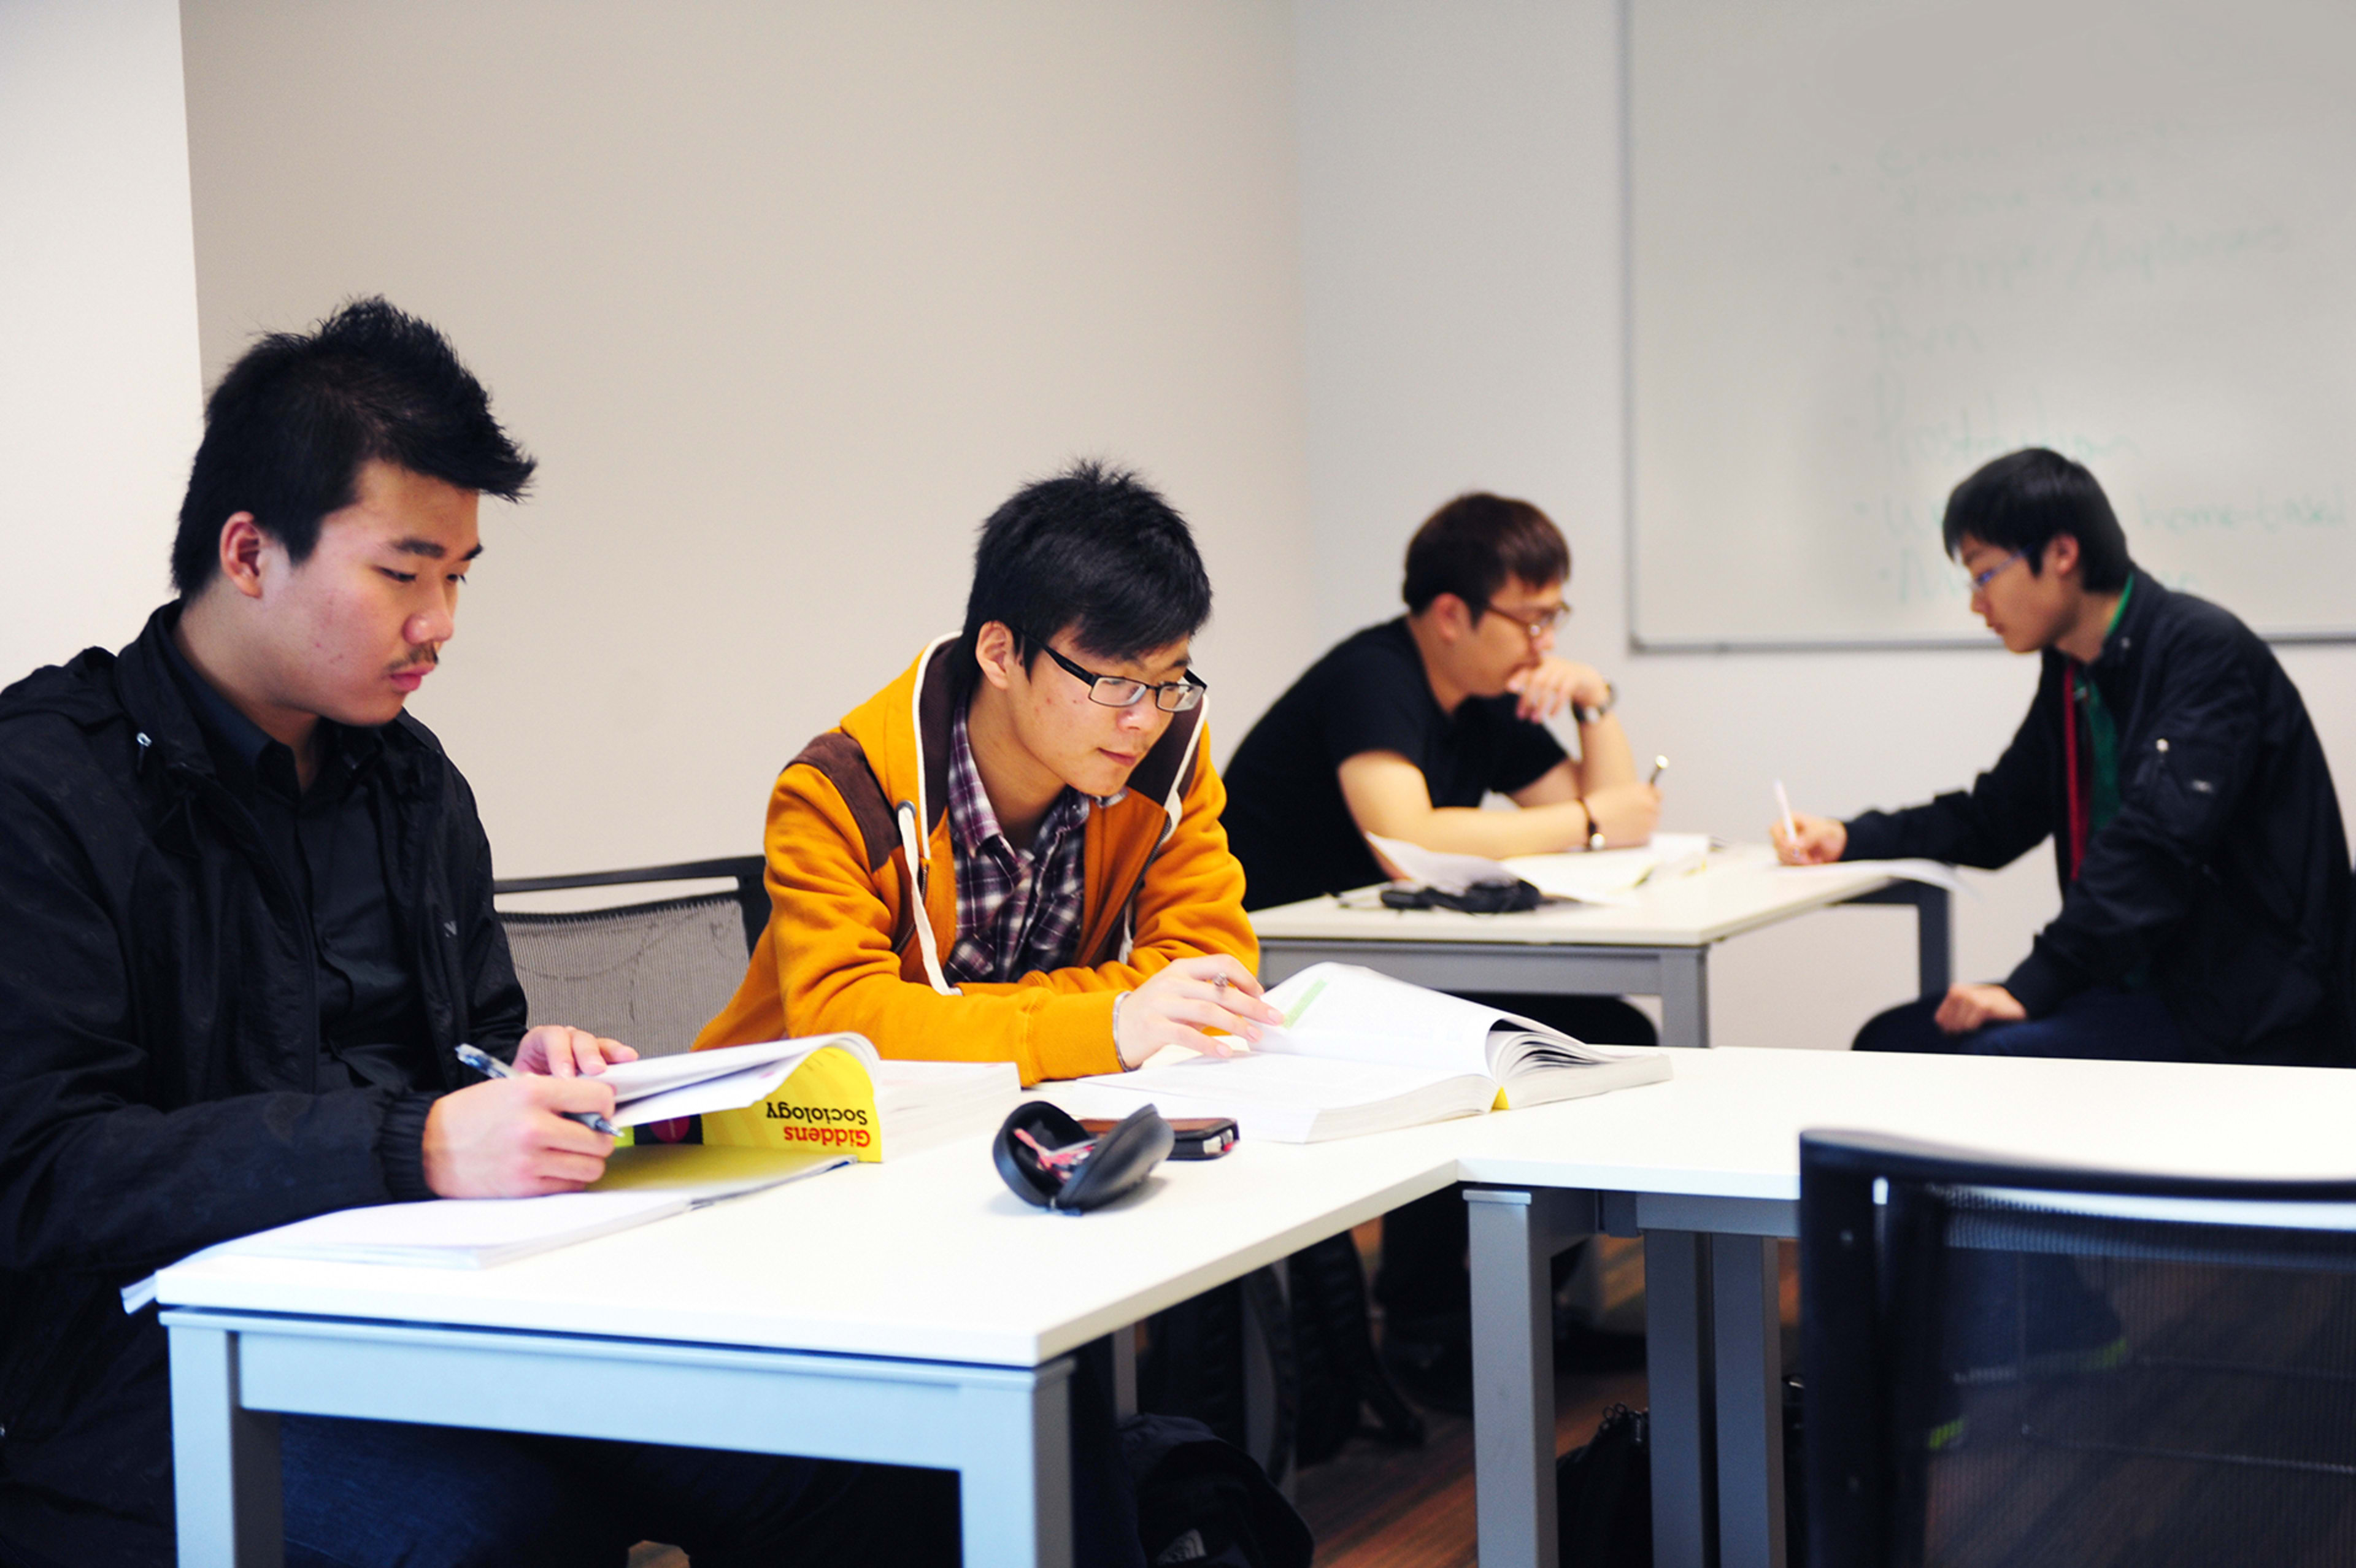 INTO international students study social sciences and media in a classroom